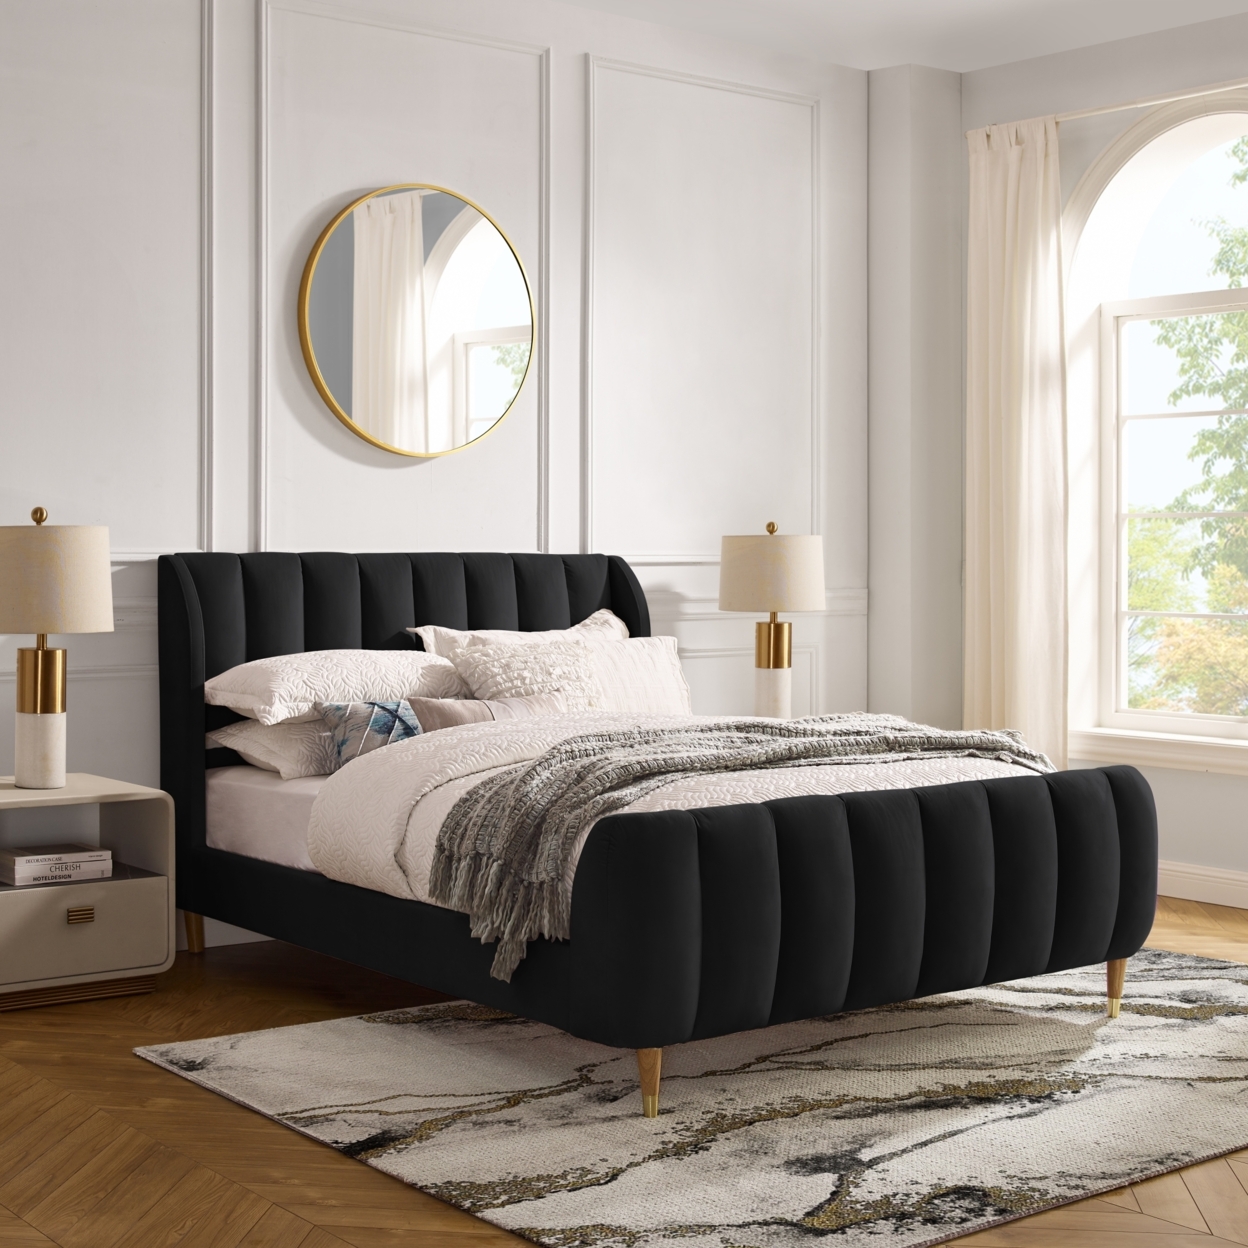 Sana Bed-Upholstered-Channel Tufted-Slats Included - Black, Queen